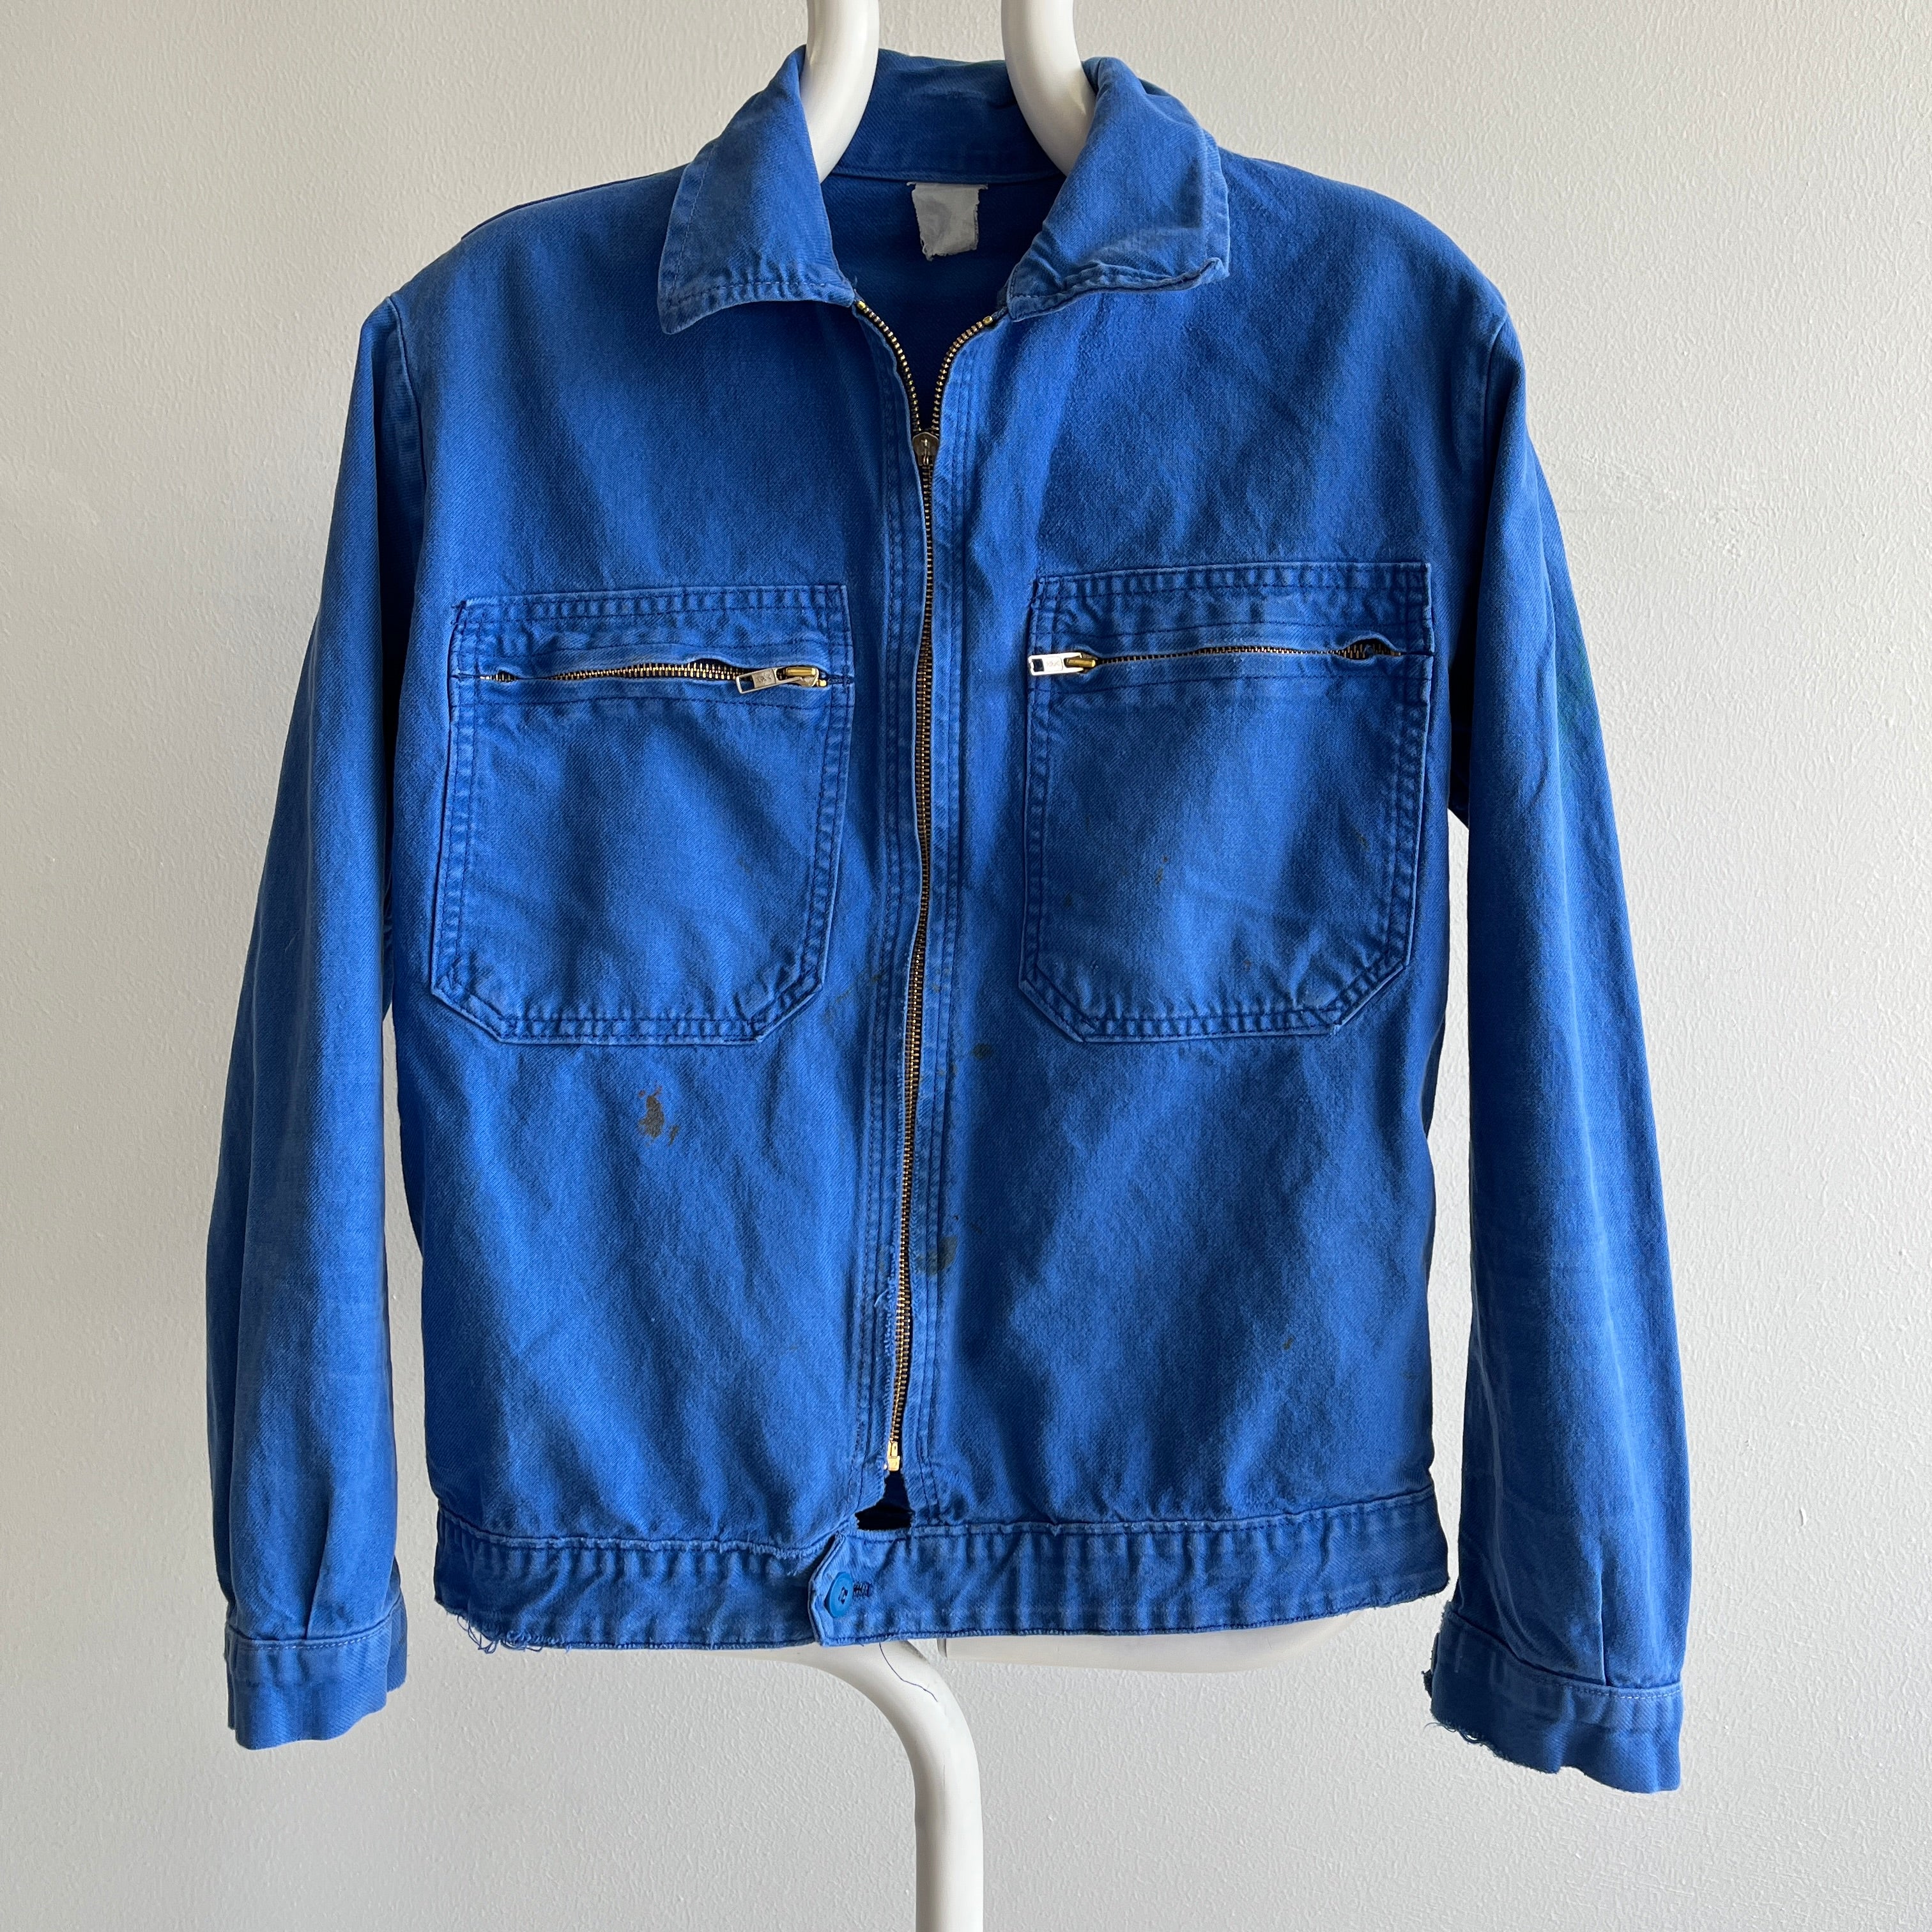 1970/80s French Cyclist Jacket - Soft and Worn